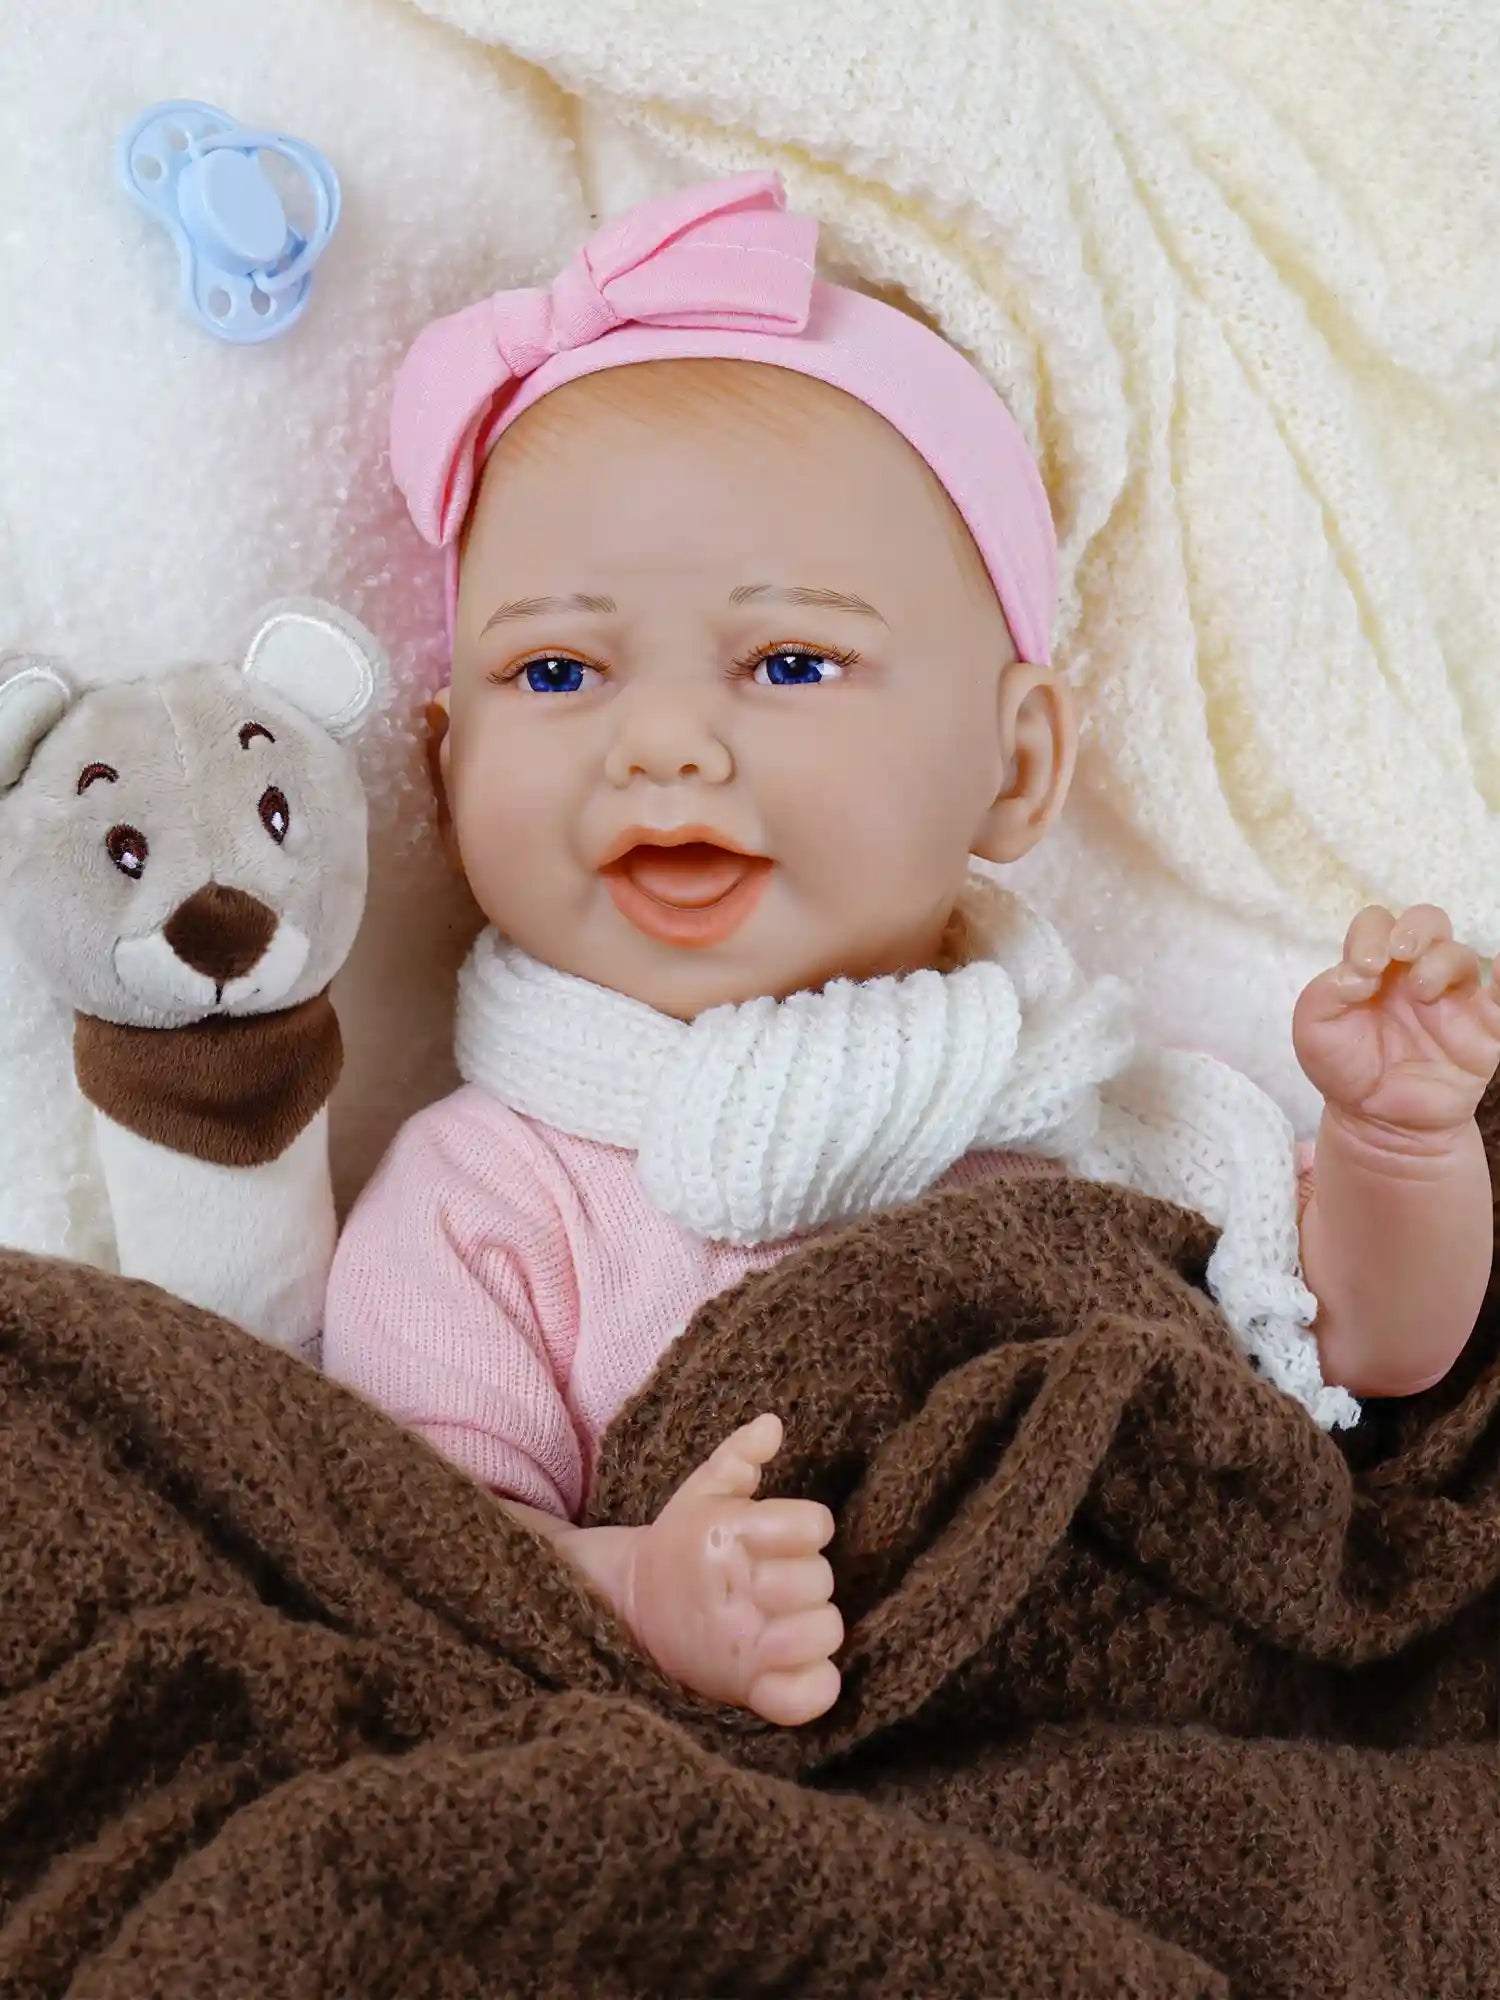 headband, cuddling with a plush bear toy, with a blue pacifier attached to its outfit